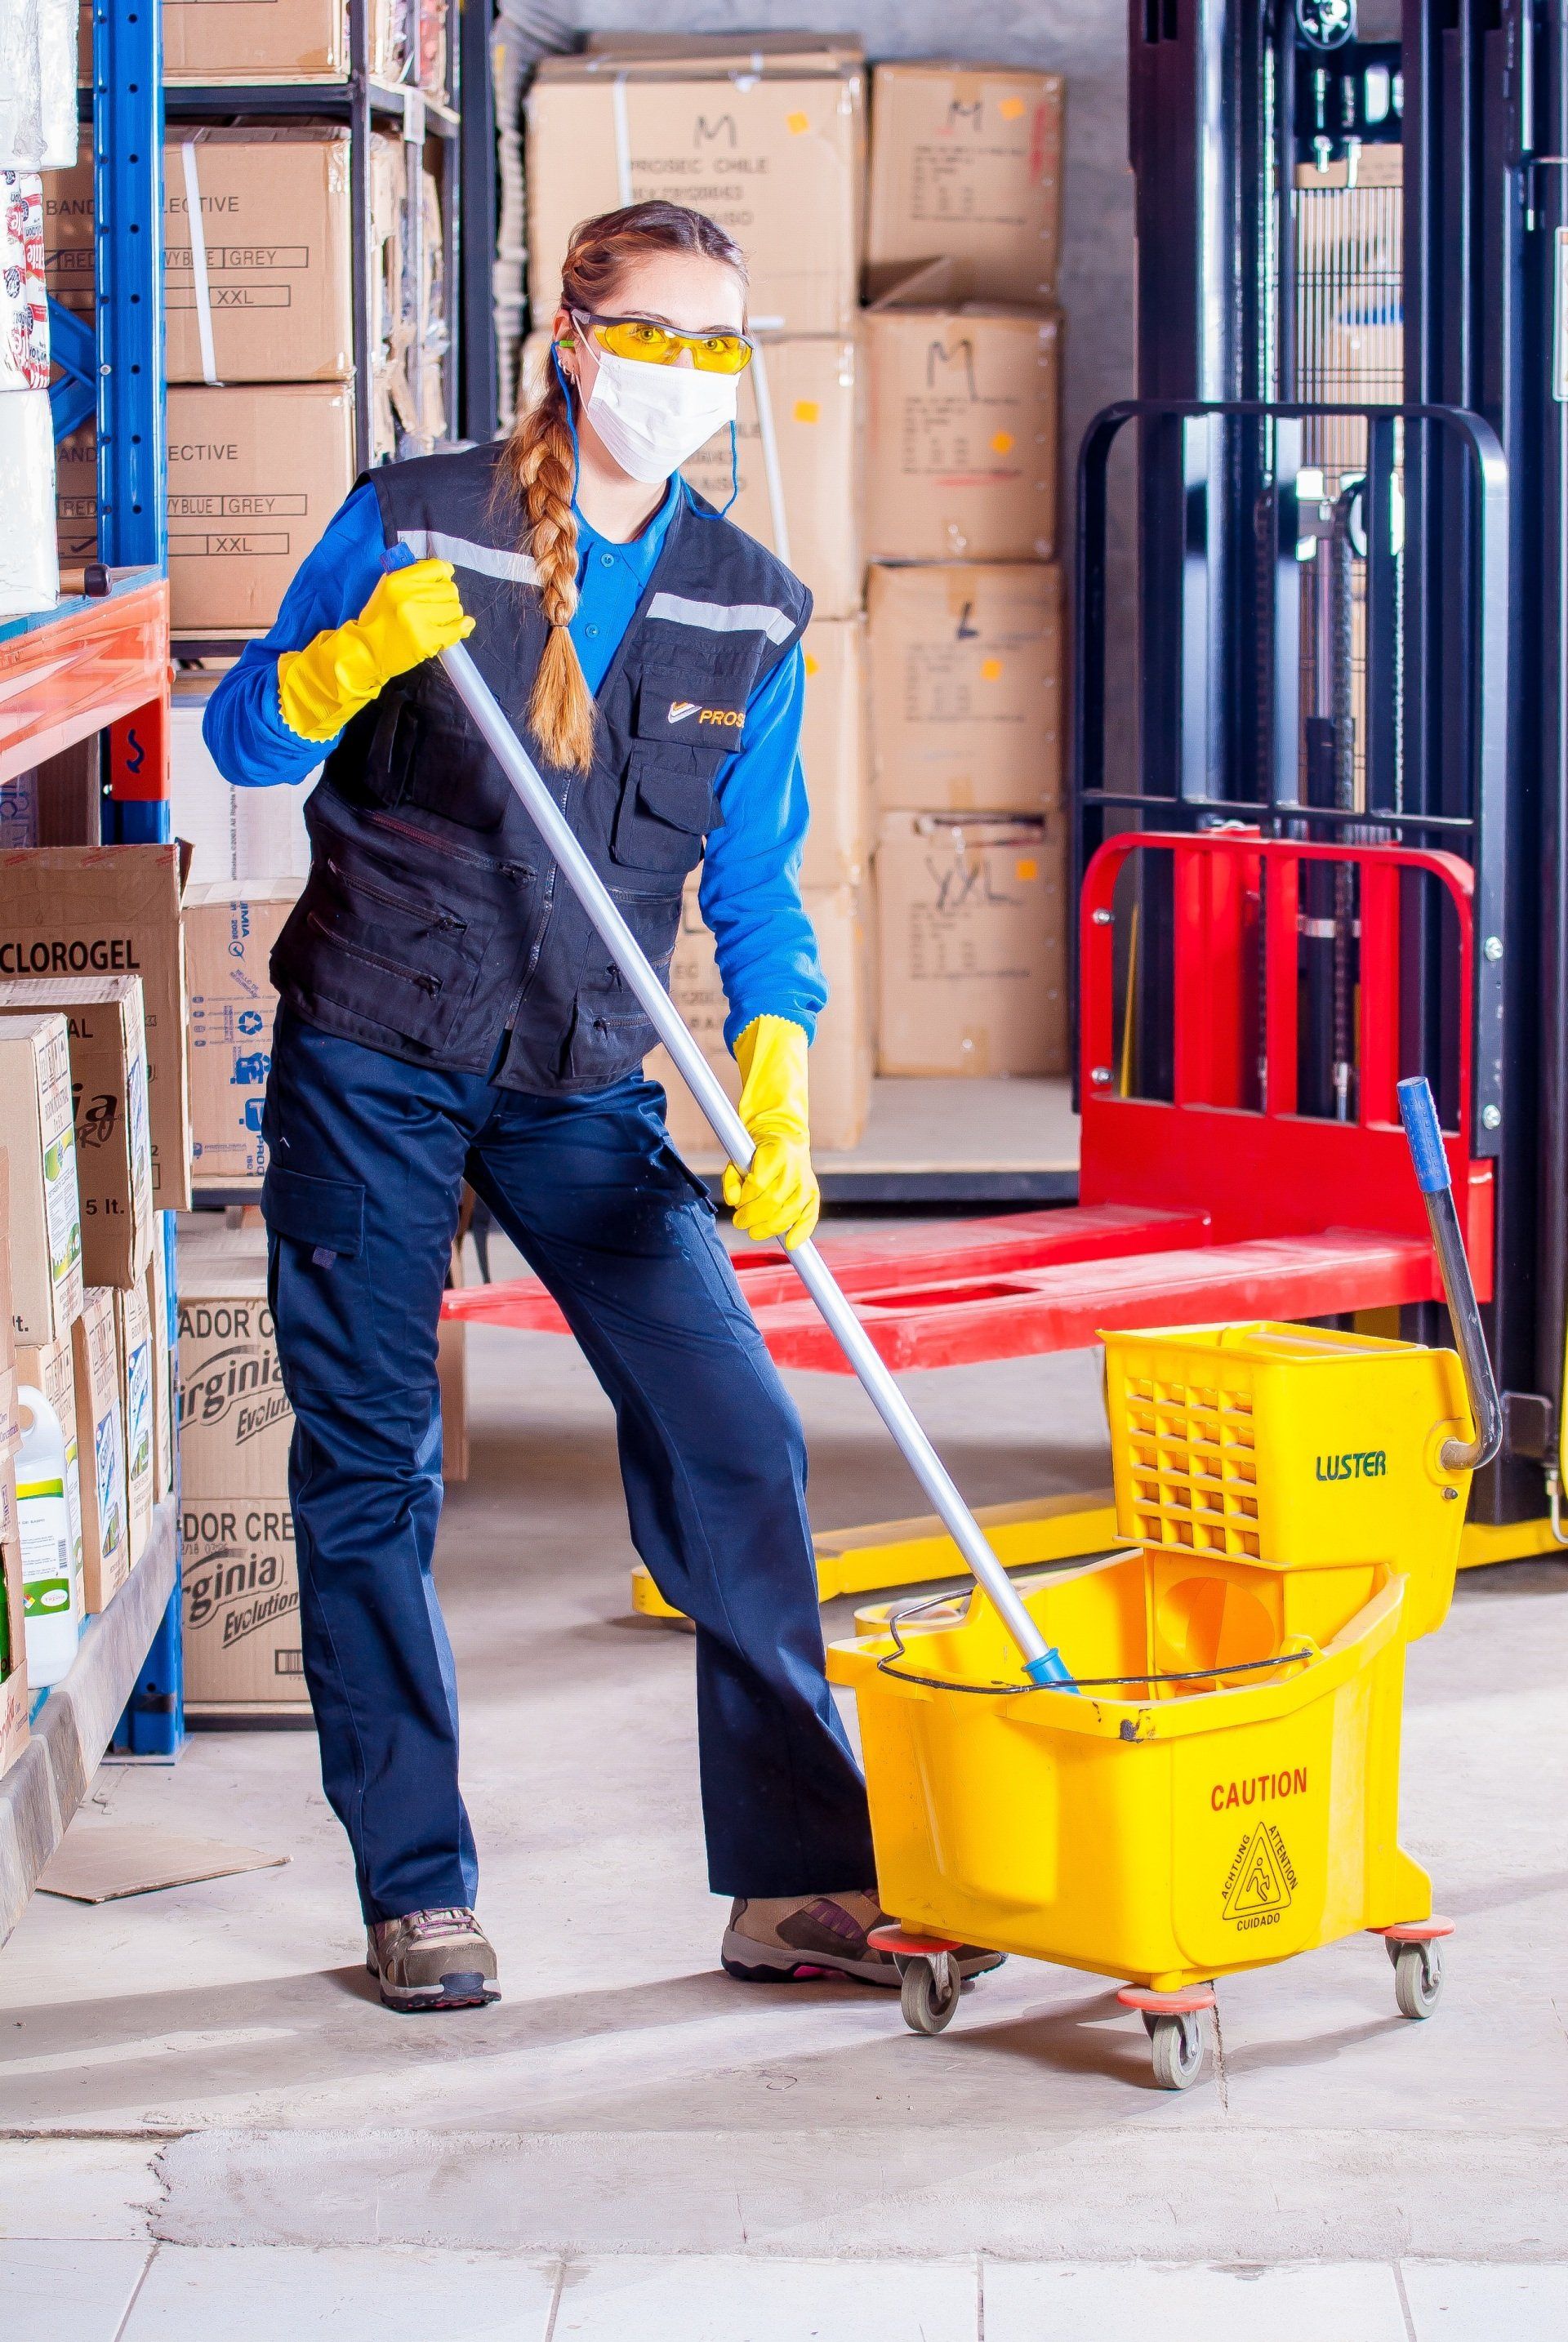 commercial cleaning services in Elgin, IL